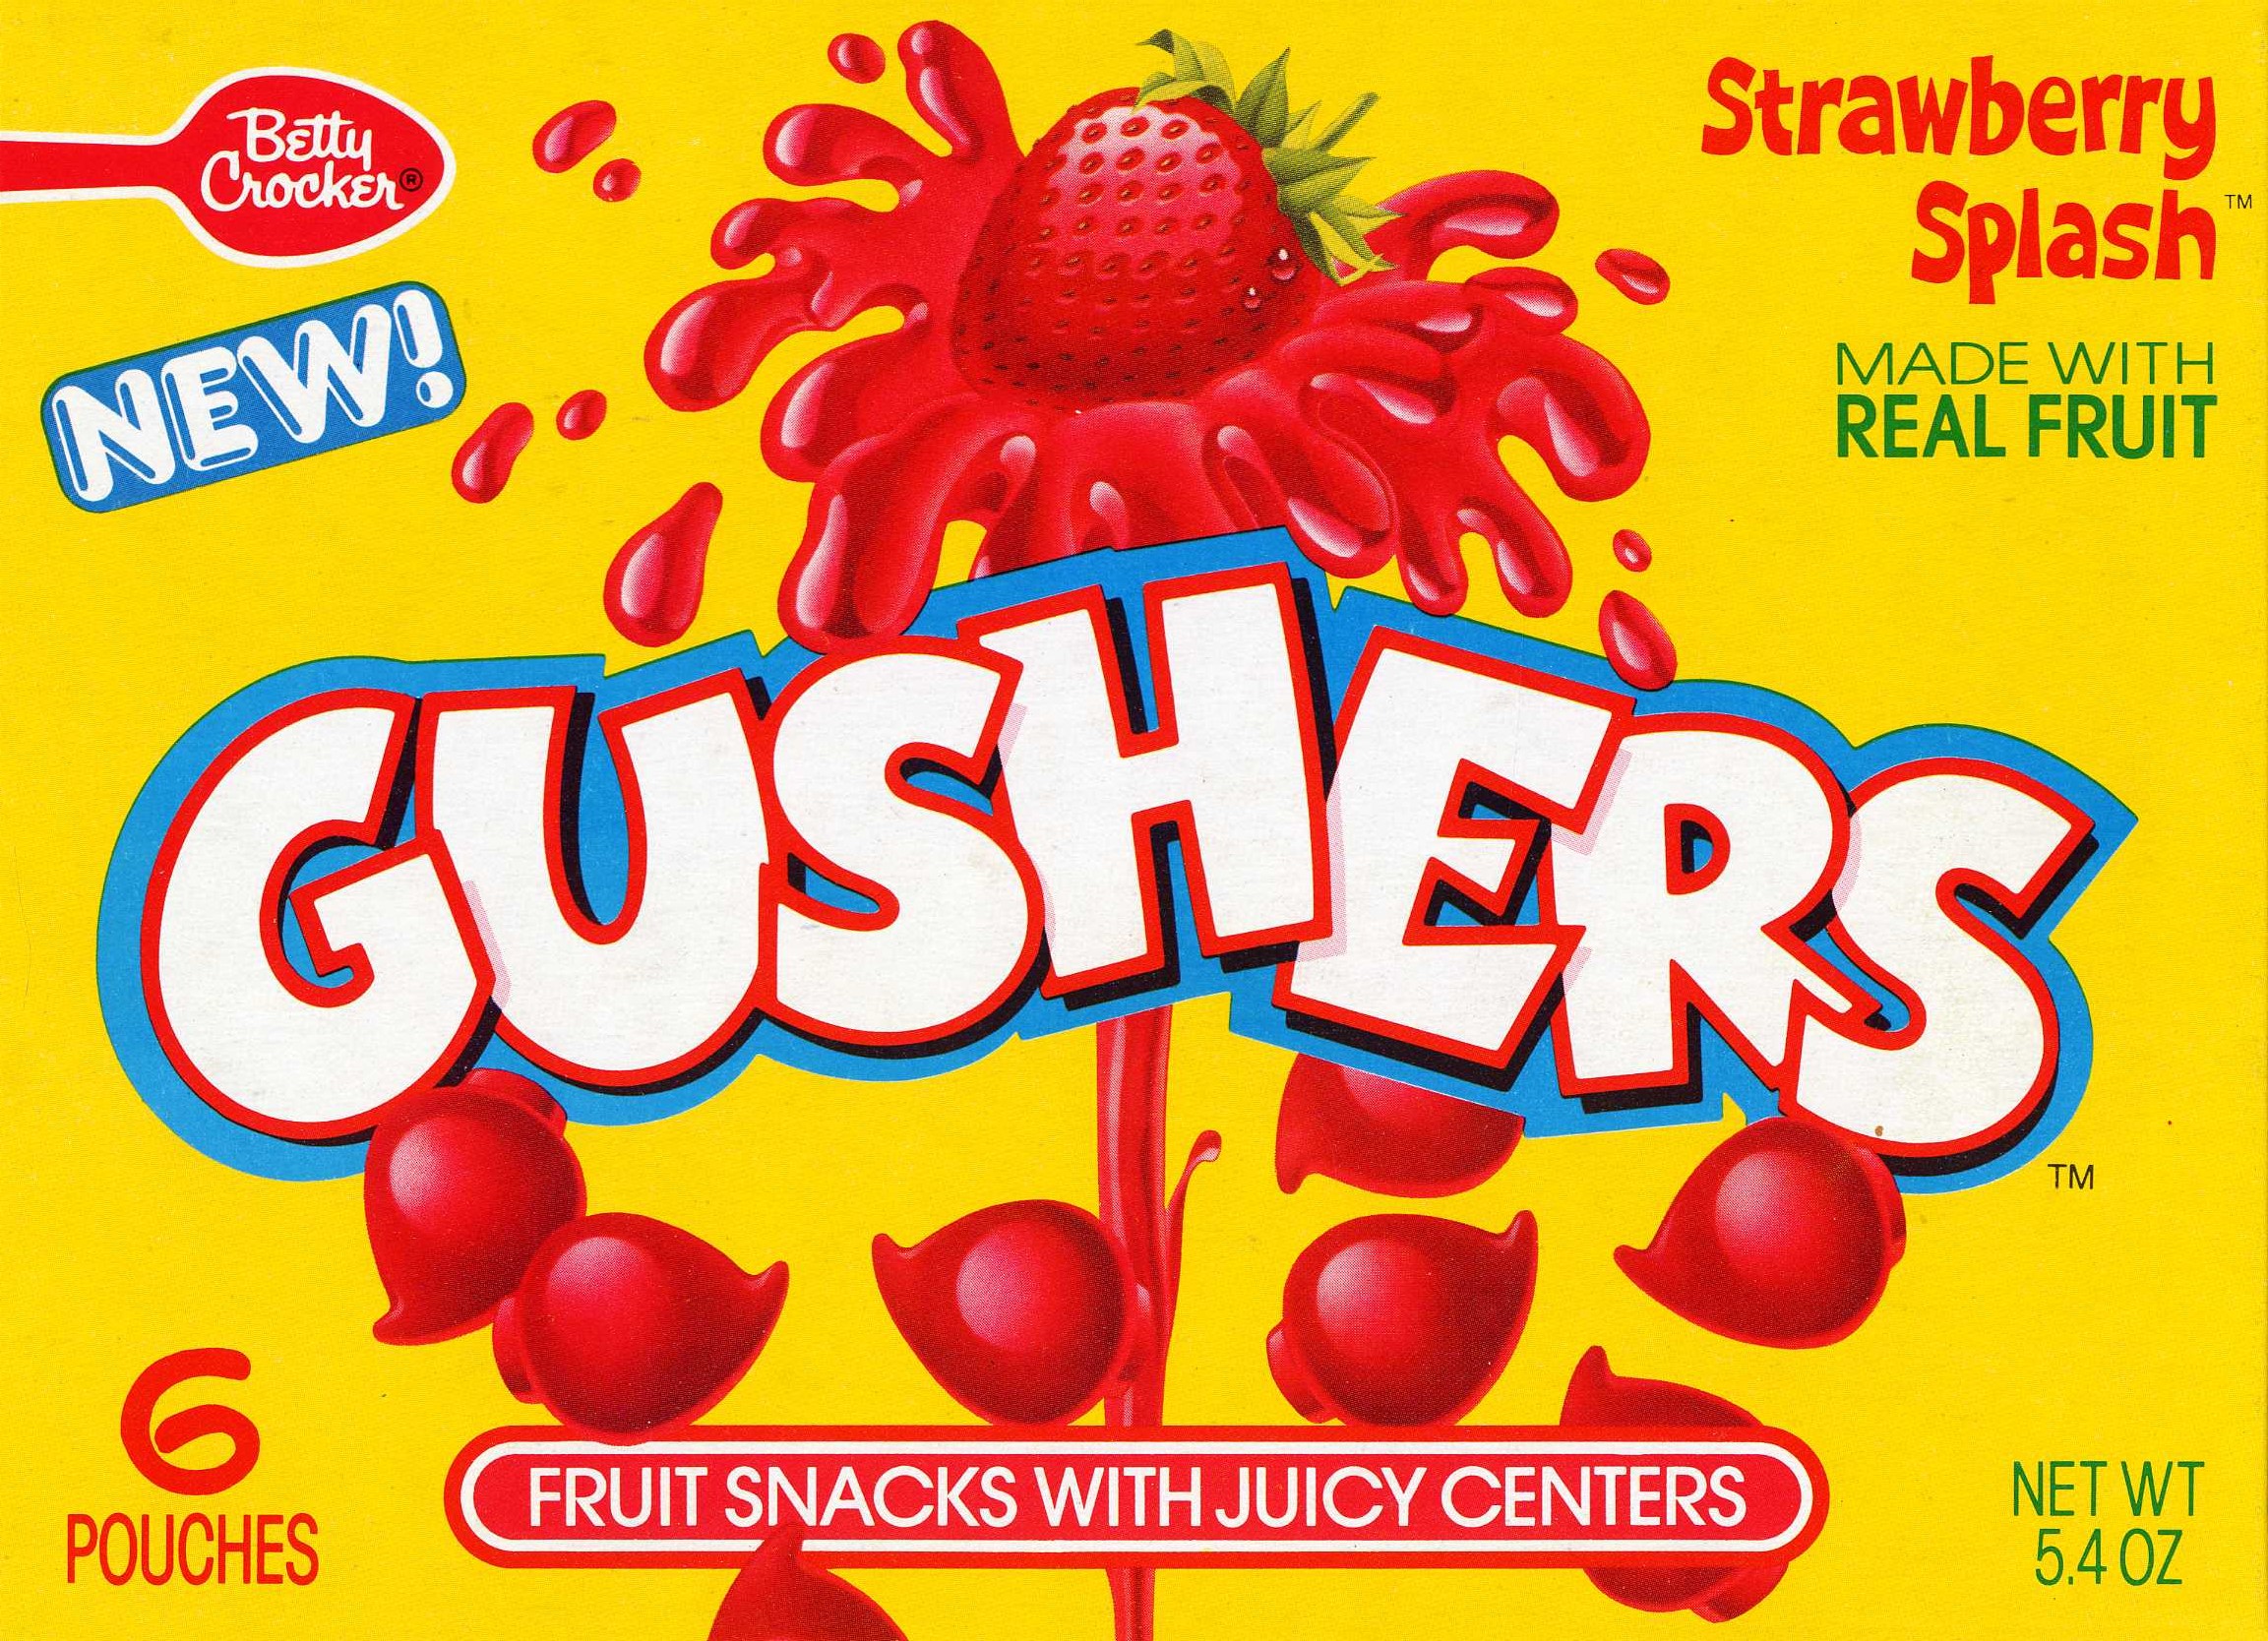 Gushers Strawberry Splash package from 1991